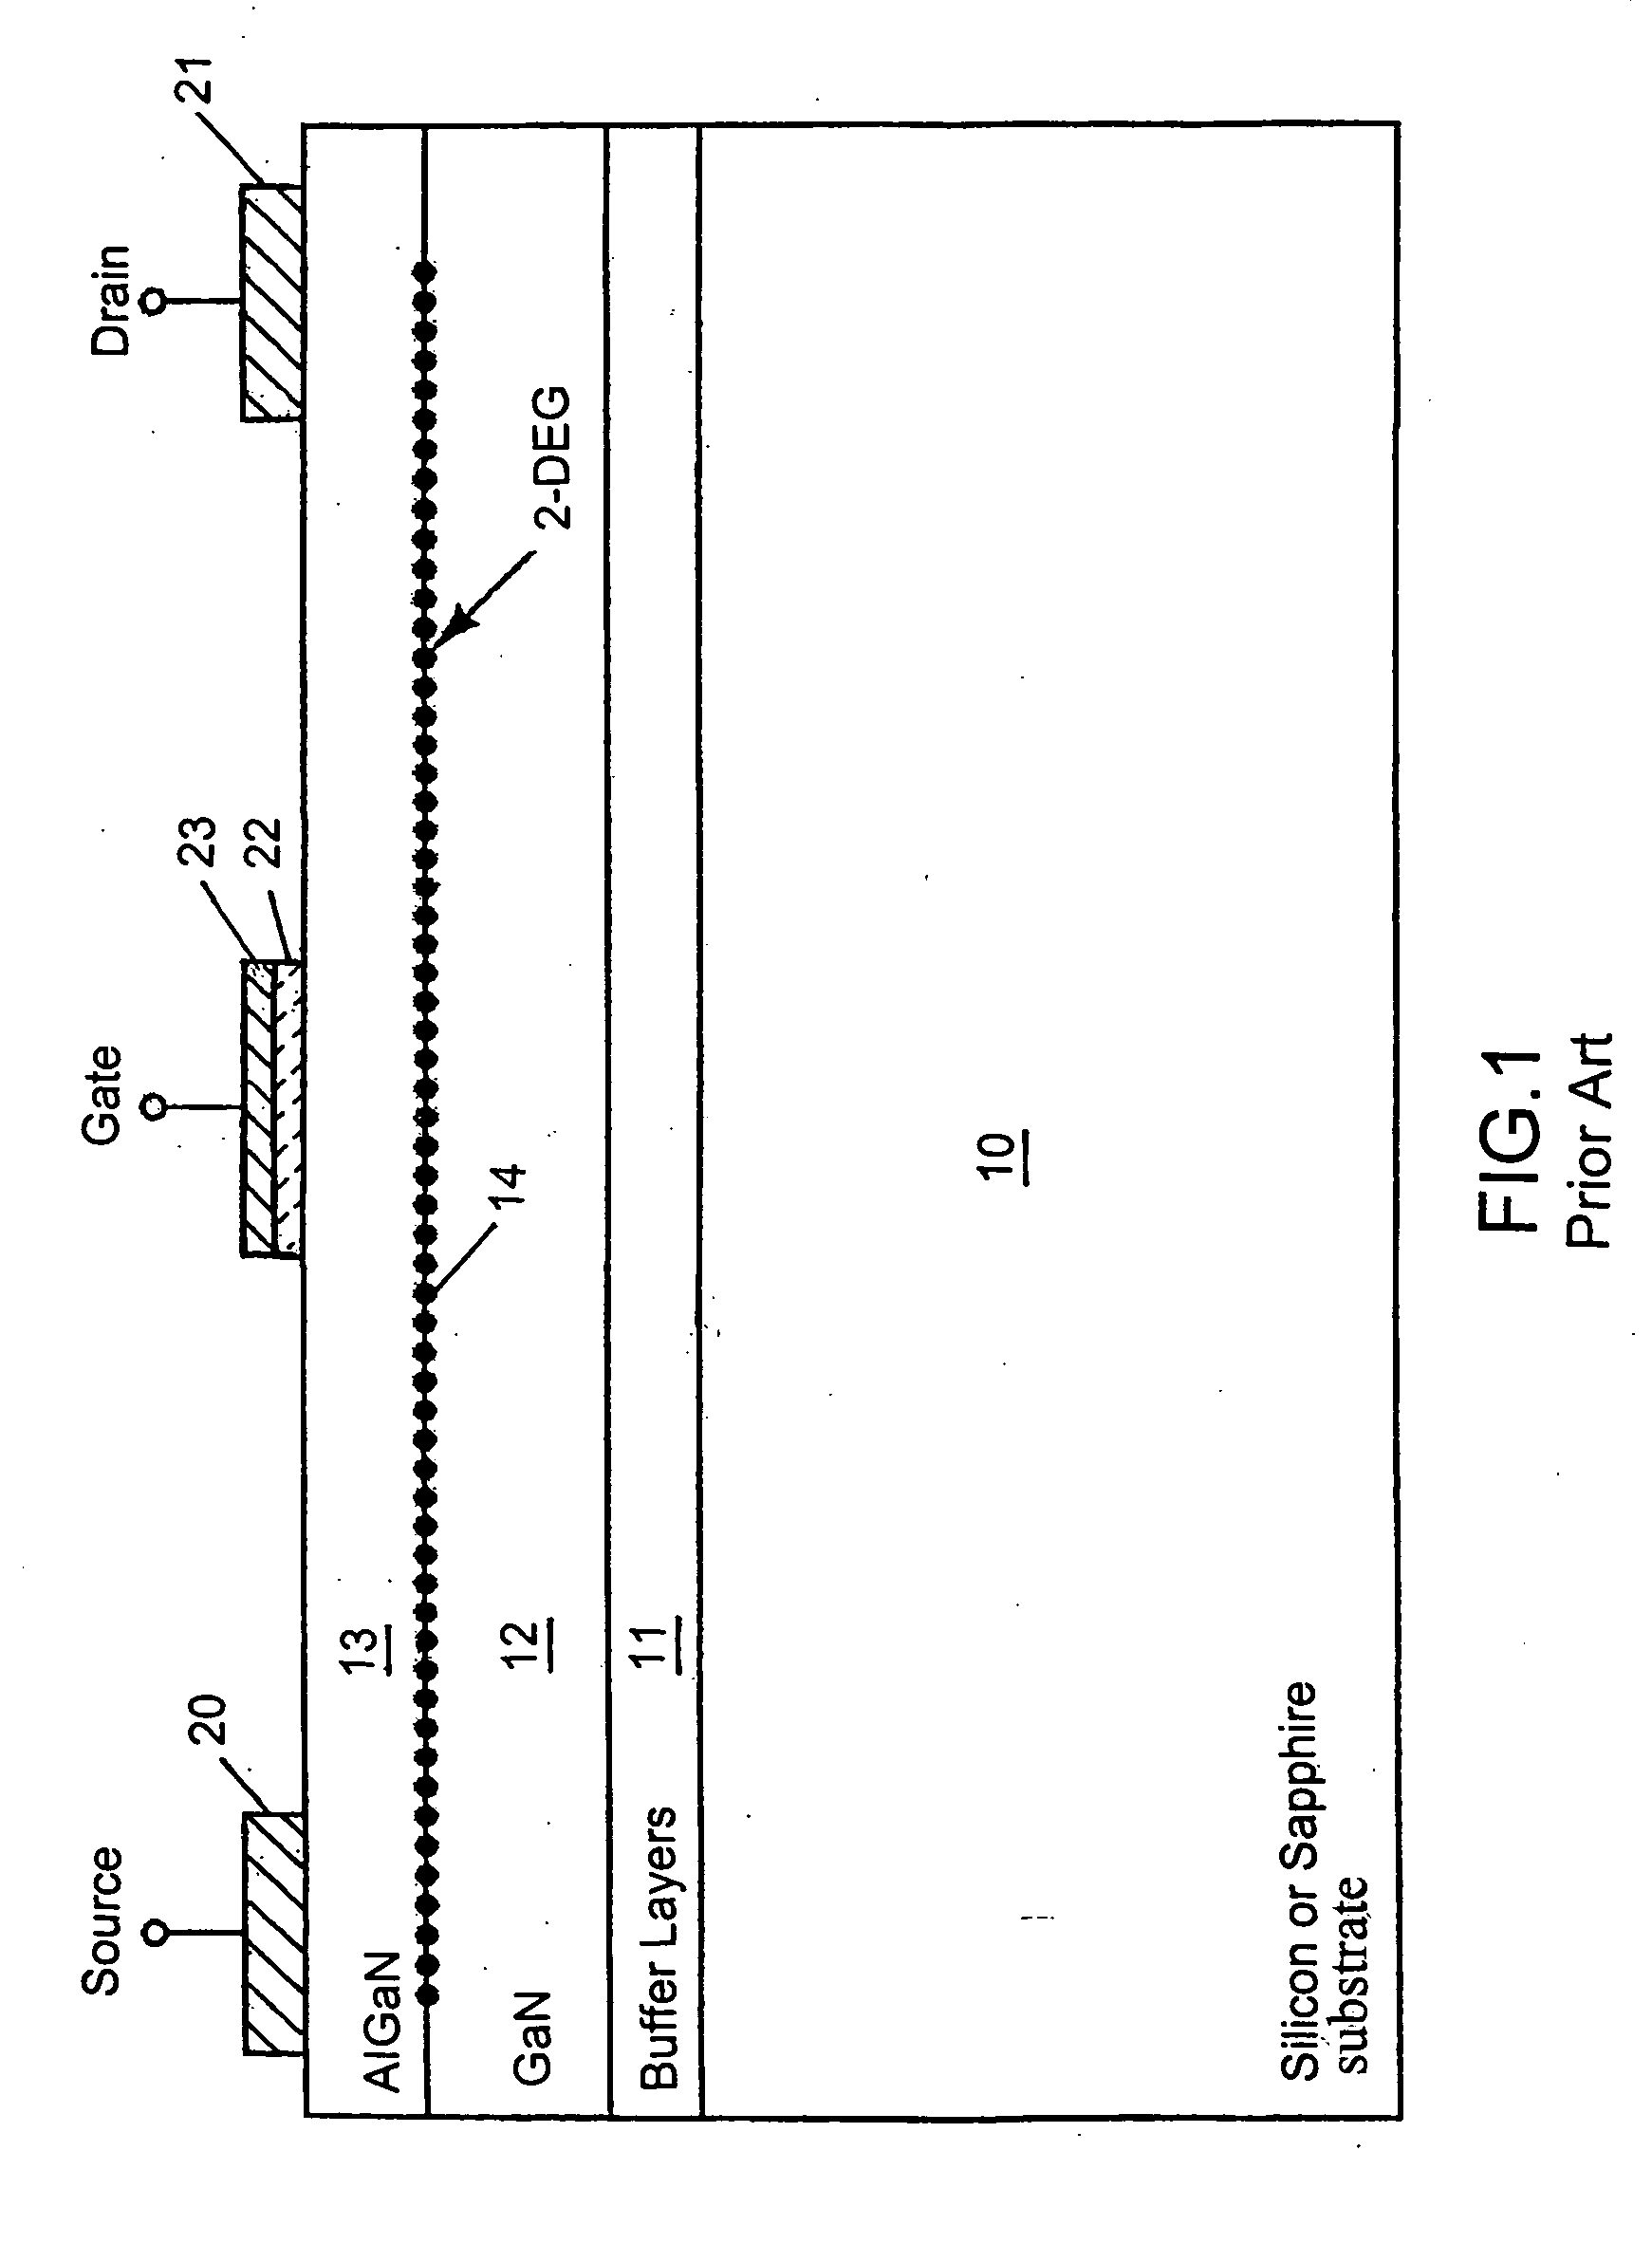 Iii-nitride device with back-gate and field plate and process for its manufacture